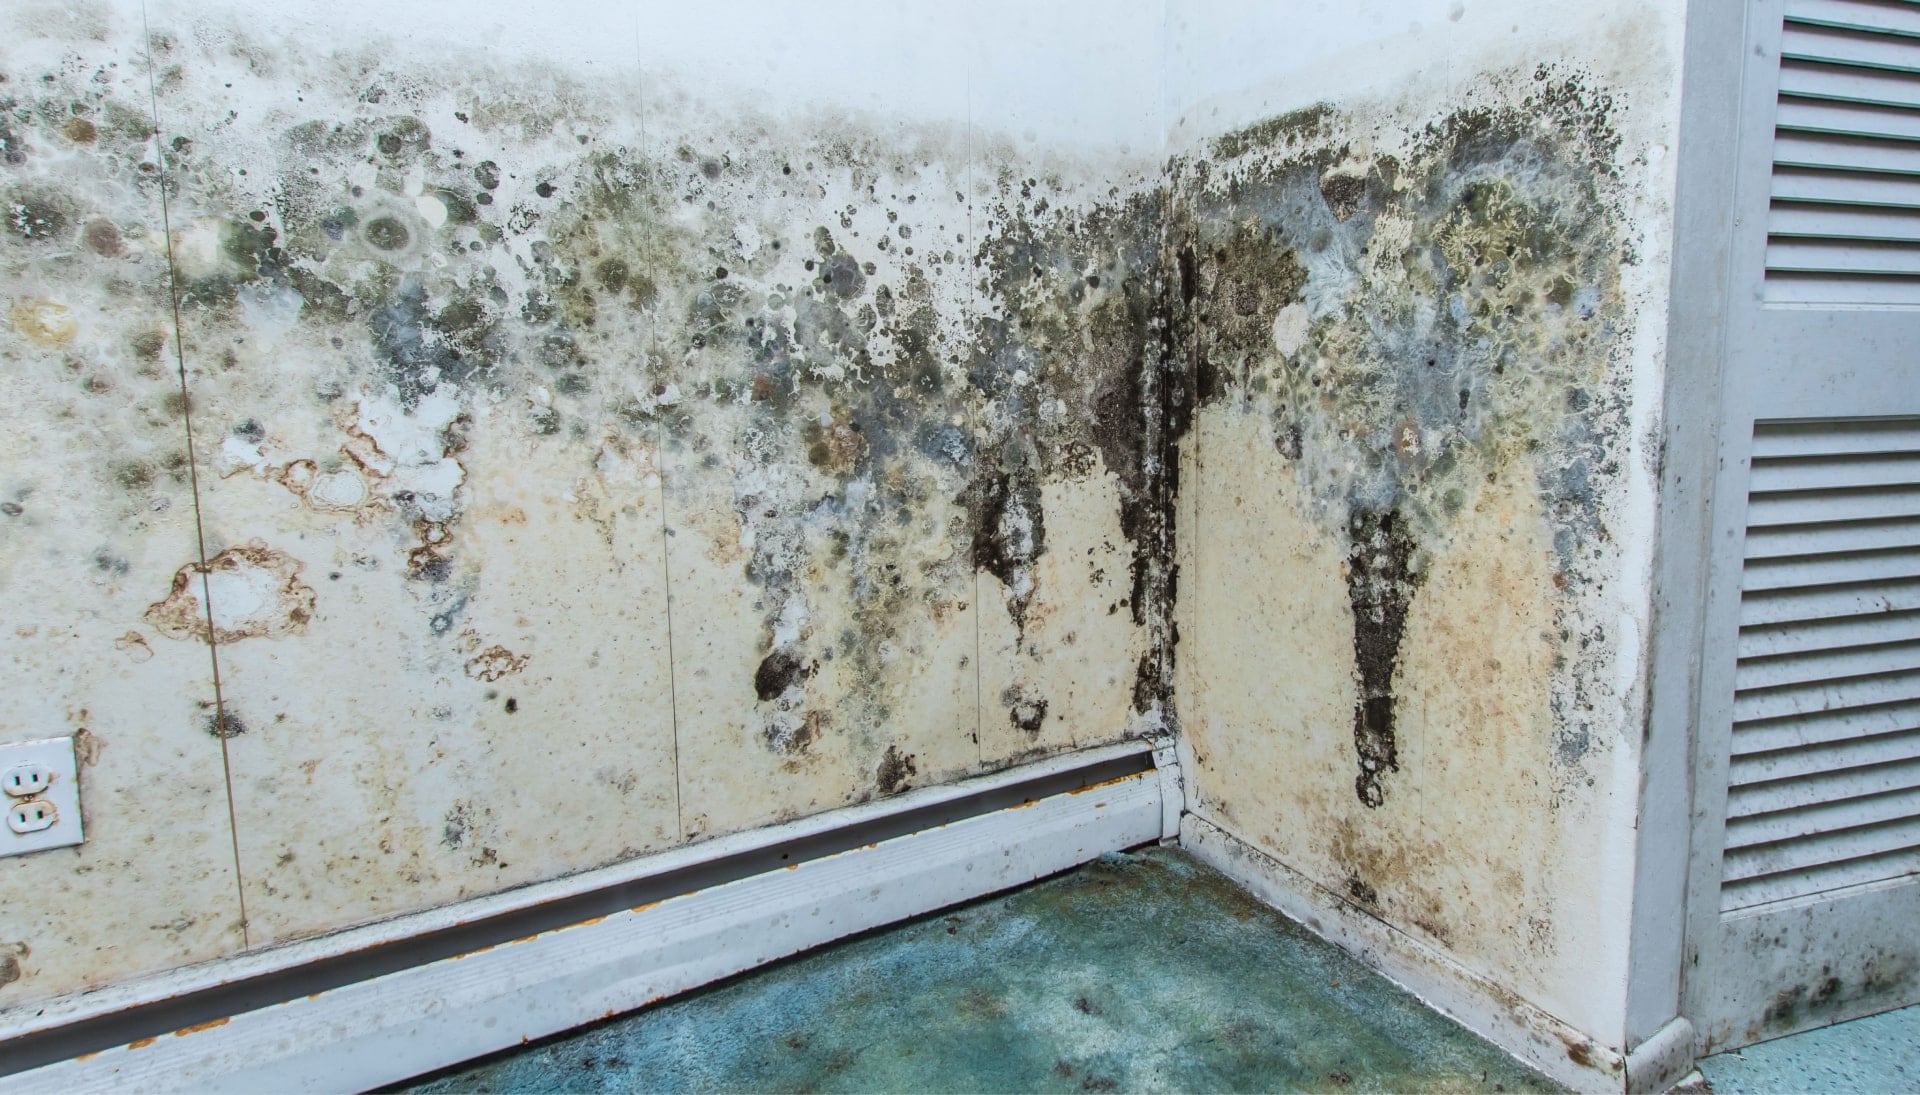 Professional mold removal, odor control, and water damage restoration service in Dallas, Texas.